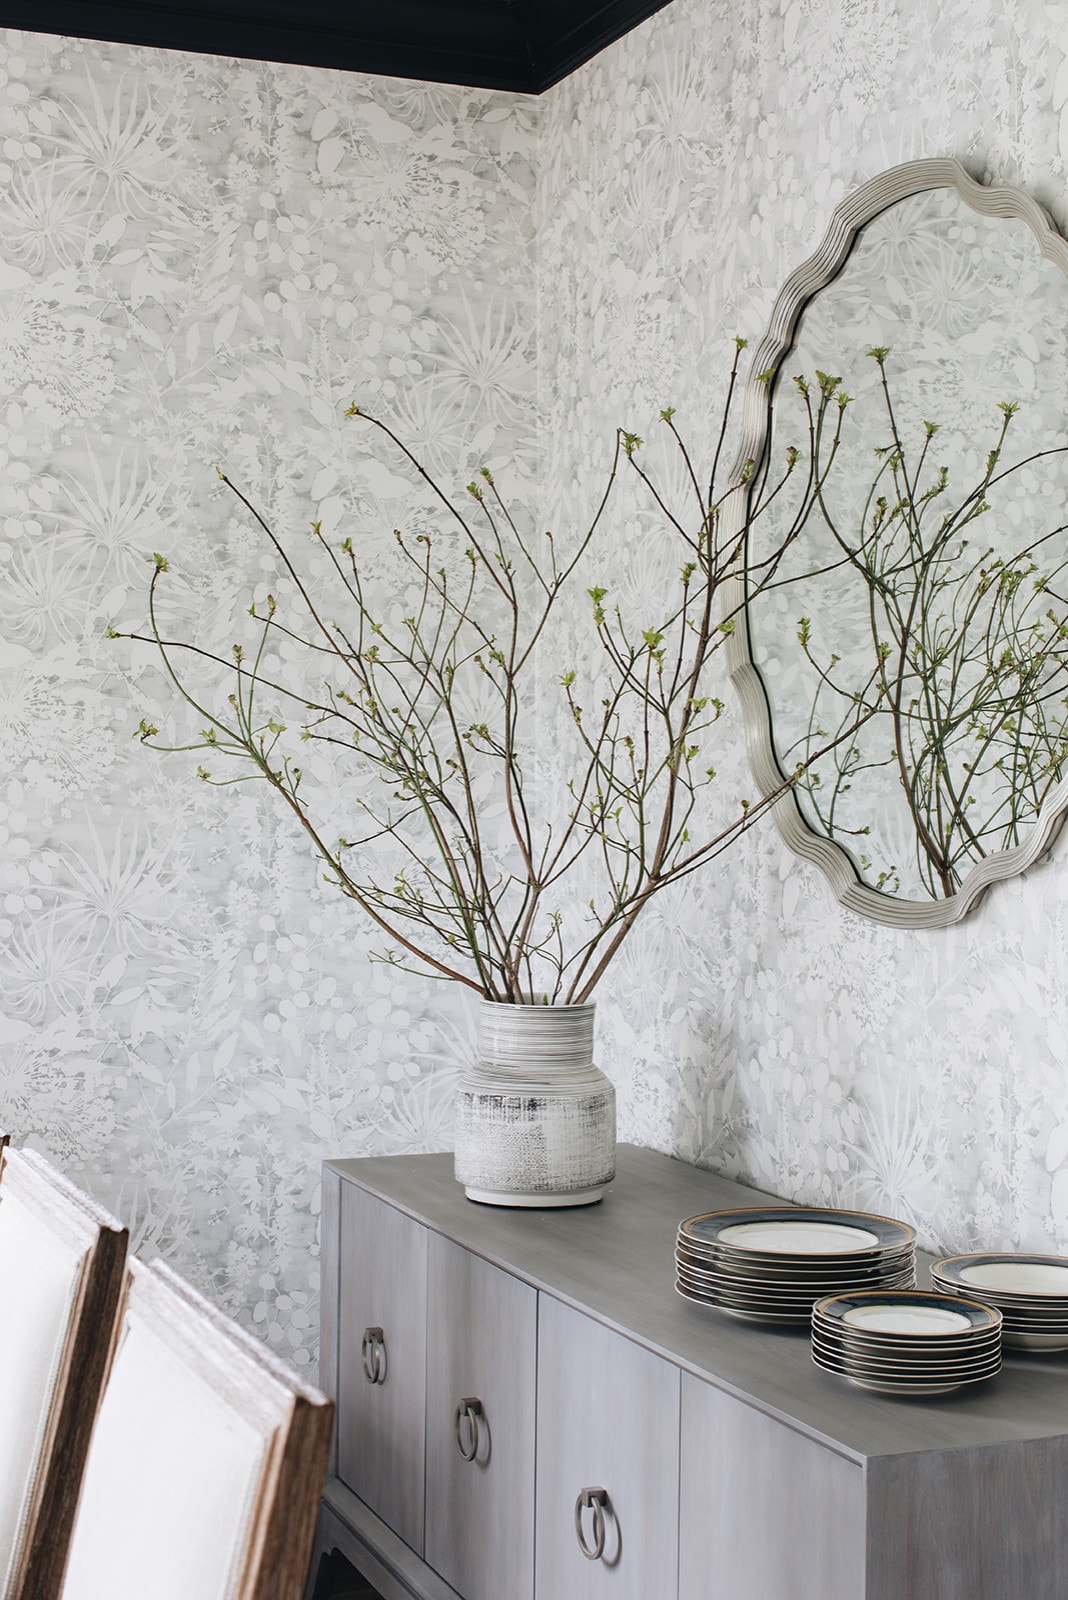 Dining room in home tour featuring sideboard decorated with cherry branches inside vase